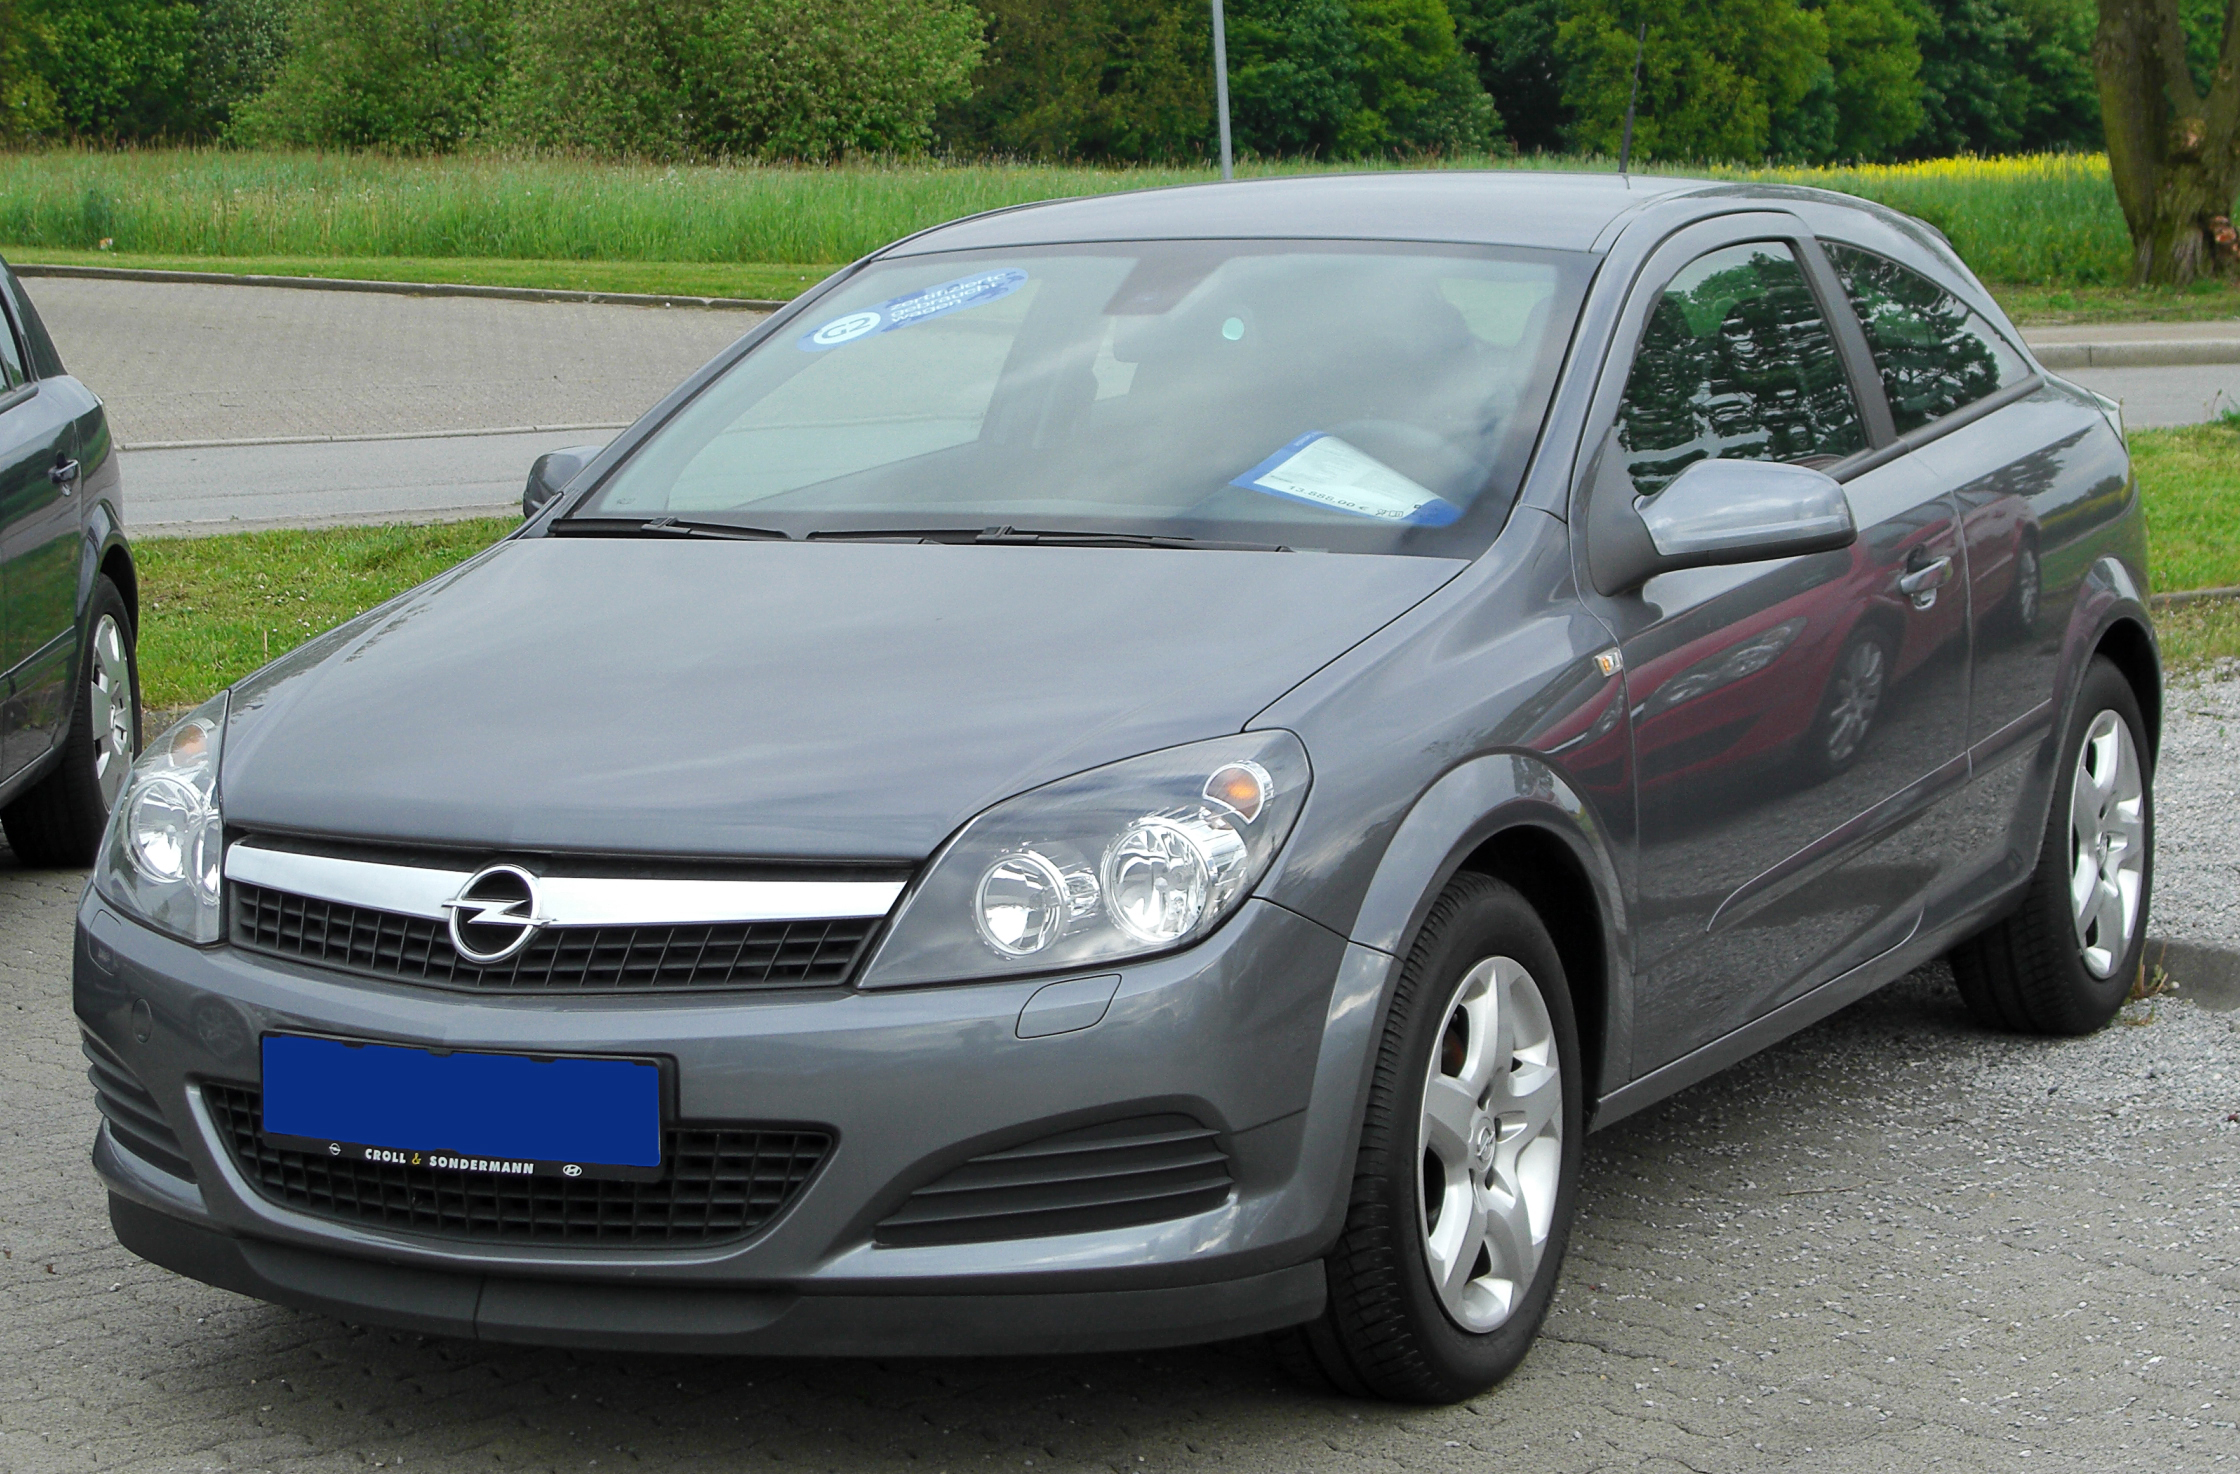 File:Opel Astra H GTC 1.7 CDTI Catch me now Facelift front.jpg